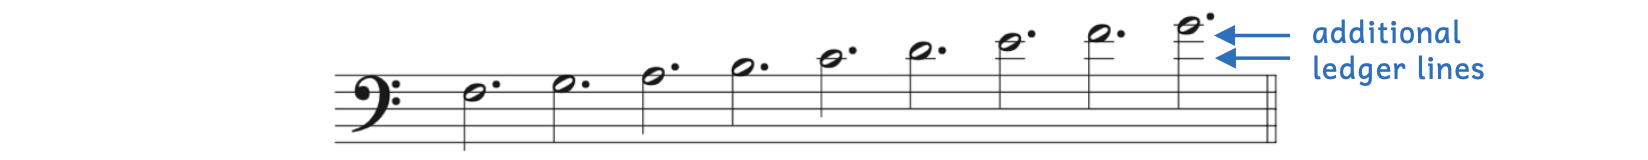 Pitches in bass clef with additional ledger lines. The dotted half notes are ascending from the F that is on the fourth line on the staff until the G that is 3 ledger lines above the staff. The additional ledger lines are pointed out.